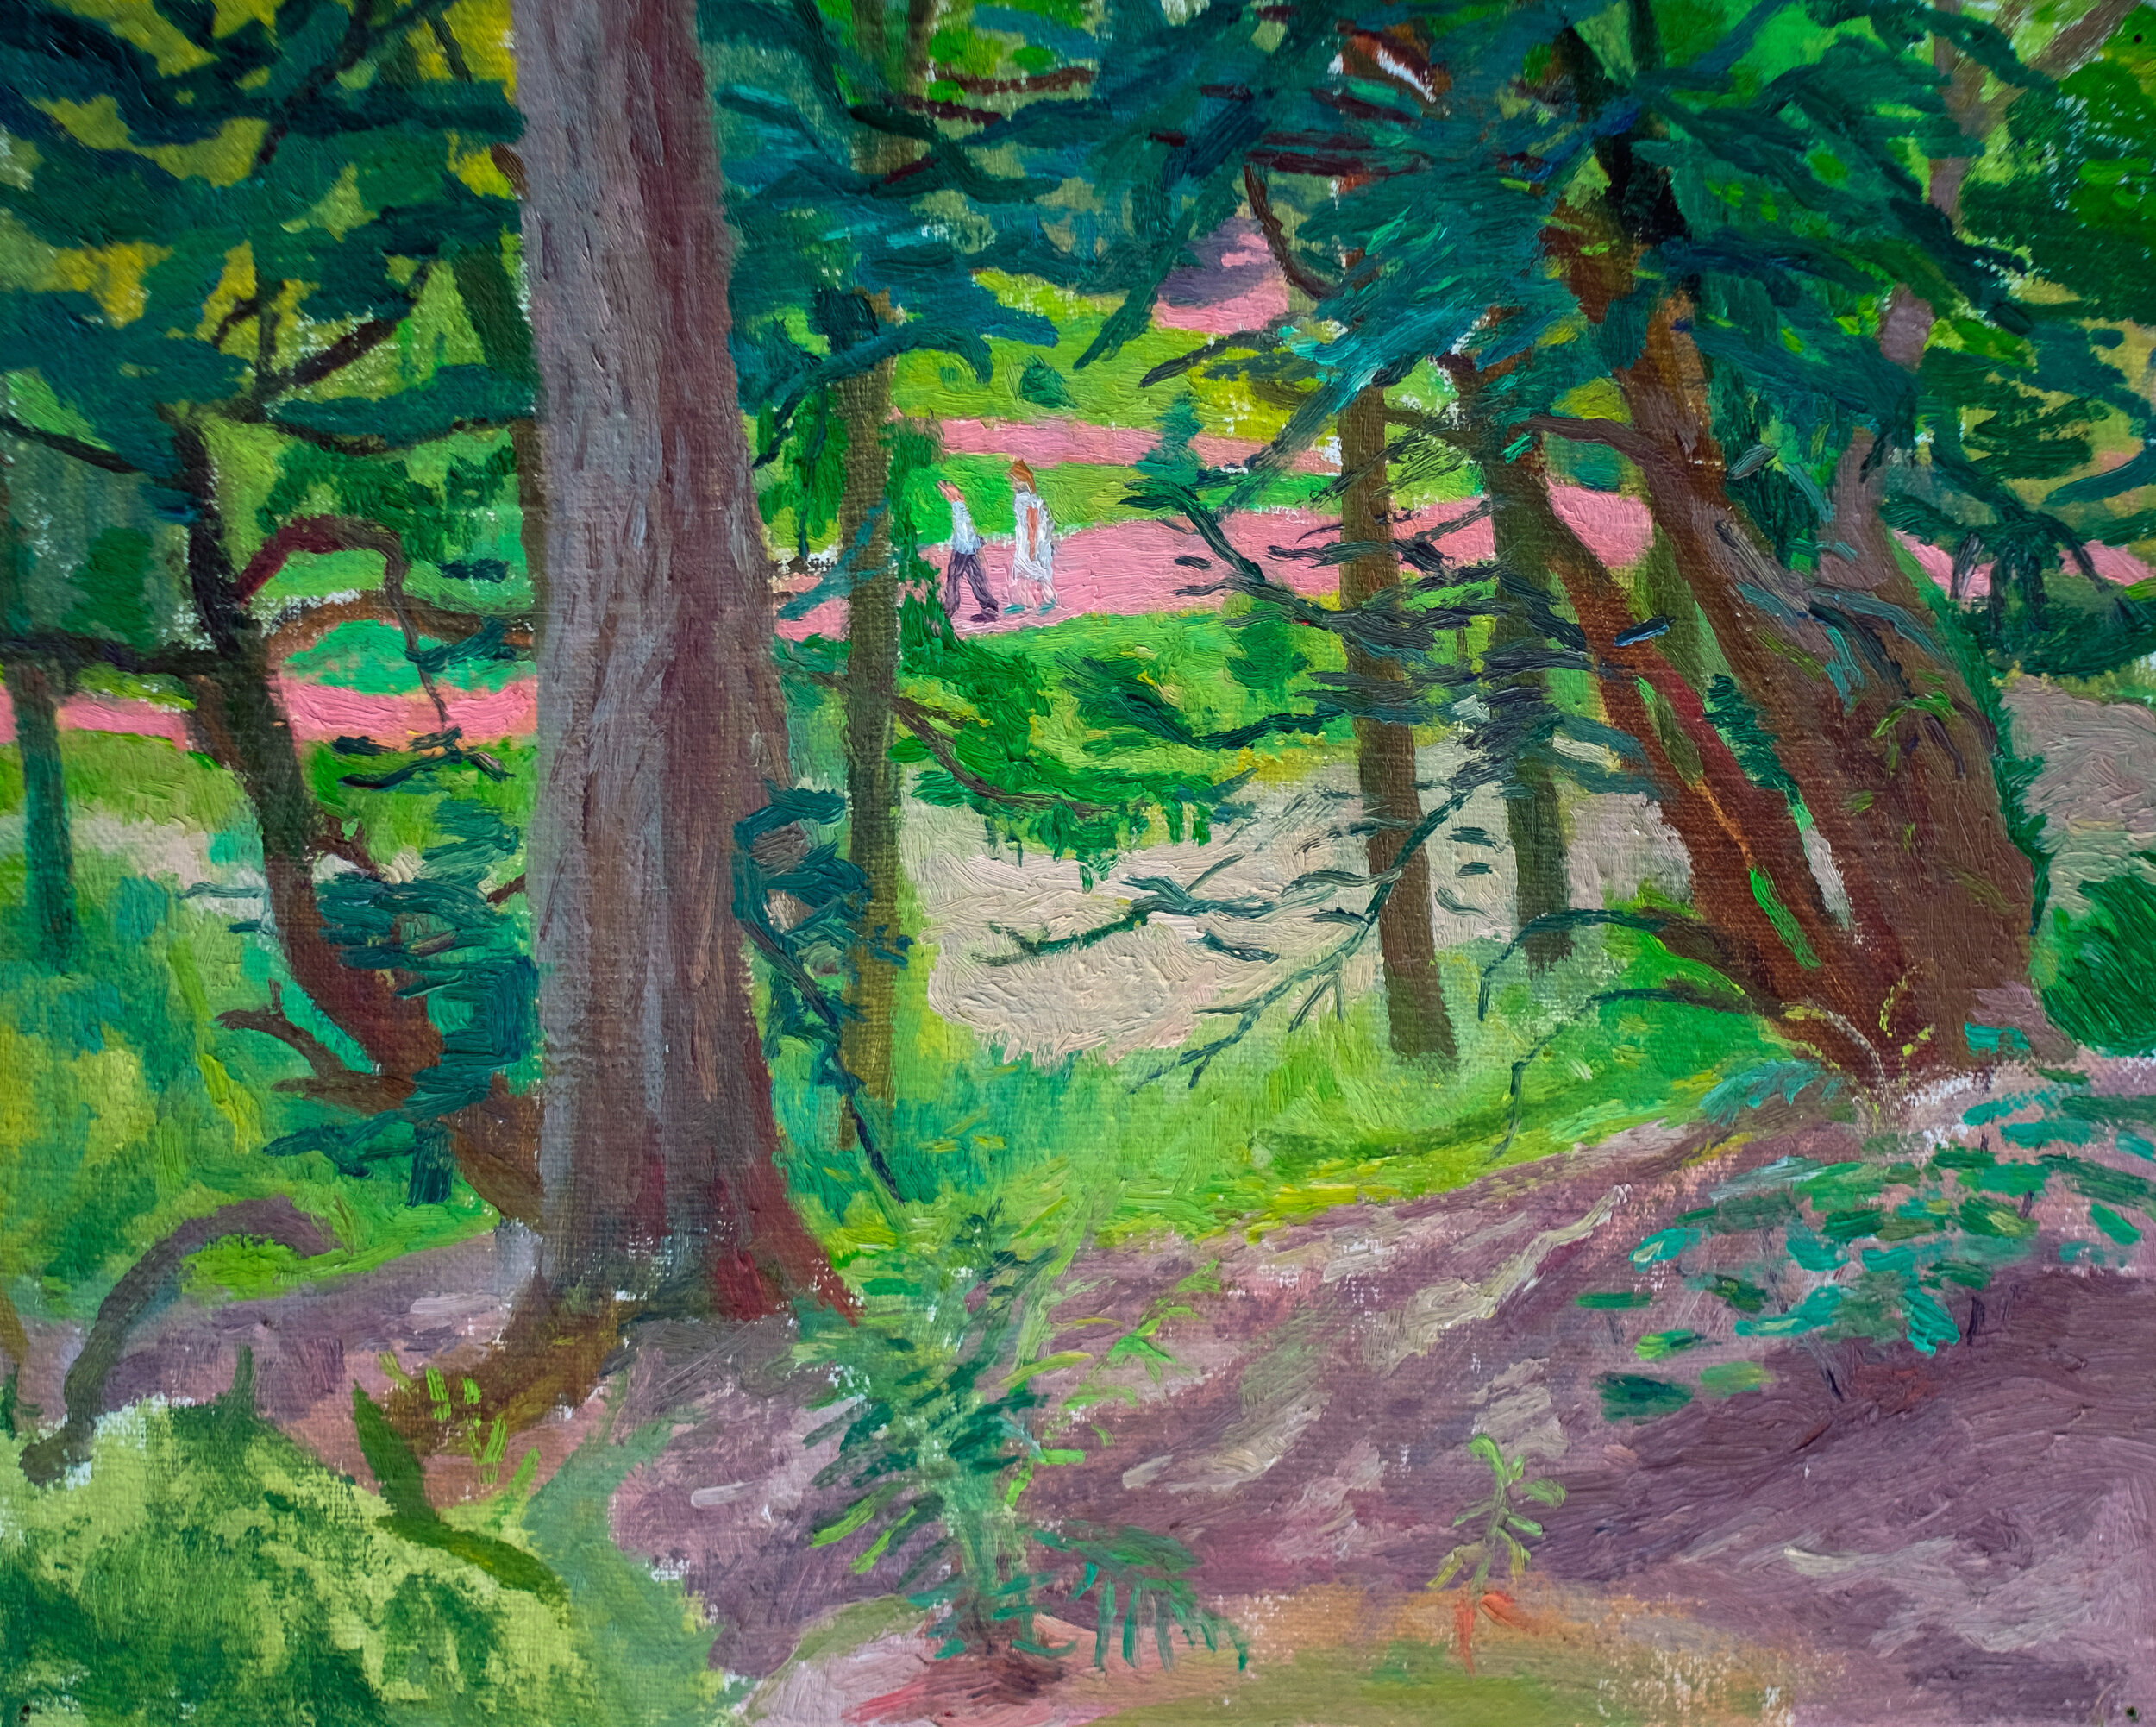 Woodland With A Pink Path & Figures, Ayrshire